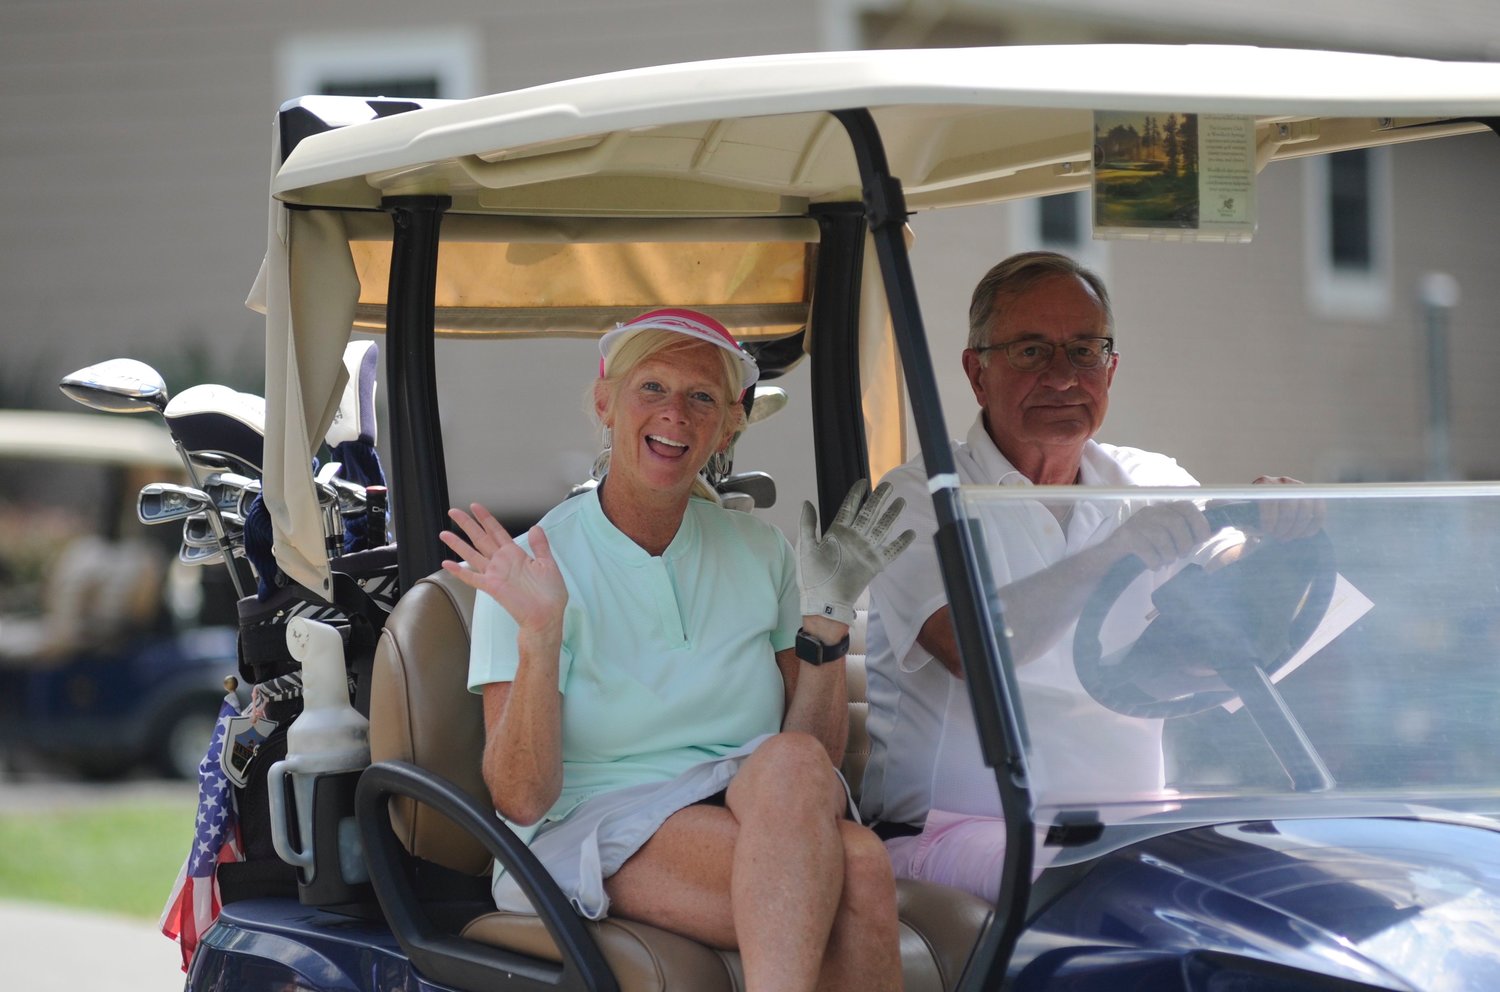 The joy of golf. A couple heads out to the back nine at the start of the fund-raising golf tourney.